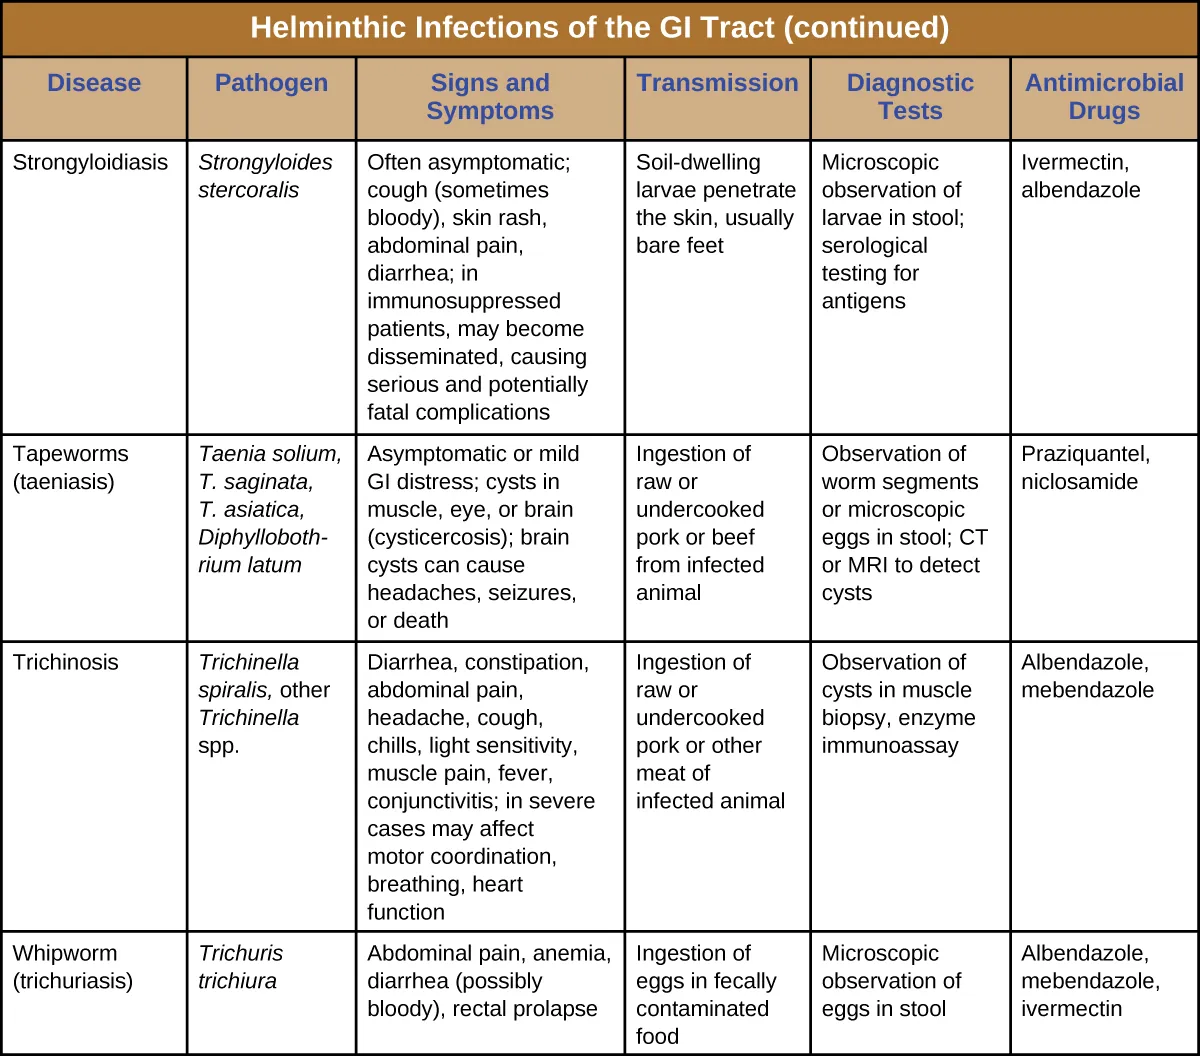 Continuation of table titled: Helminthic Infections of the GI Tract. Columns: Disease, Pathogen, Signs and Symptoms, Transmission, Diagnostic Tests, Antimicrobial Drugs. Strongyloidiasis; Strongyloides stercoralis; Often asymptomatic; cough (sometimes bloody), skin rash, abdominal pain, diarrhea; in immunosuppressed patients, may become disseminated, causing serious and potentially fatal complications Soil-dwelling larvae penetrate the skin, usually bare feet; Microscopic observation of larvae in stool; serological testing for antigens; Ivermectin, albendazole. Tapeworms (taeniasis) ; Taenia solium, T. saginata, T. asiatica, Diphyllobothrium latum; Asymptomatic or mild GI distress; cysts in muscle, eye, or brain (cysticercosis); brain cysts can cause headaches, seizures, or death; Ingestion of raw or undercooked pork or beef from infected animal; Observation of worm segments or microscopic eggs in stool; CT or MRI to detect cysts; Praziquantel, niclosamide. Trichinosis; Trichinella spiralis, other Trichinella spp. Diarrhea, constipation, abdominal pain, headache, cough, chills, light sensitivity, muscle pain, fever, conjunctivitis; in severe cases may affect motor coordination, breathing, heart function; Ingestion of raw or undercooked pork or other meat of infected animal; Observation of cysts in muscle biopsy, enzyme immunoassay; Albendazole, mebendazole. Whipworm (trichuriasis); Trichuris trichiura; Abdominal pain, anemia, diarrhea (possibly bloody), rectal prolapse; Ingestion of eggs in fecally contaminated food Microscopic observation of eggs in stool; Albendazole, mebendazole, ivermectin.